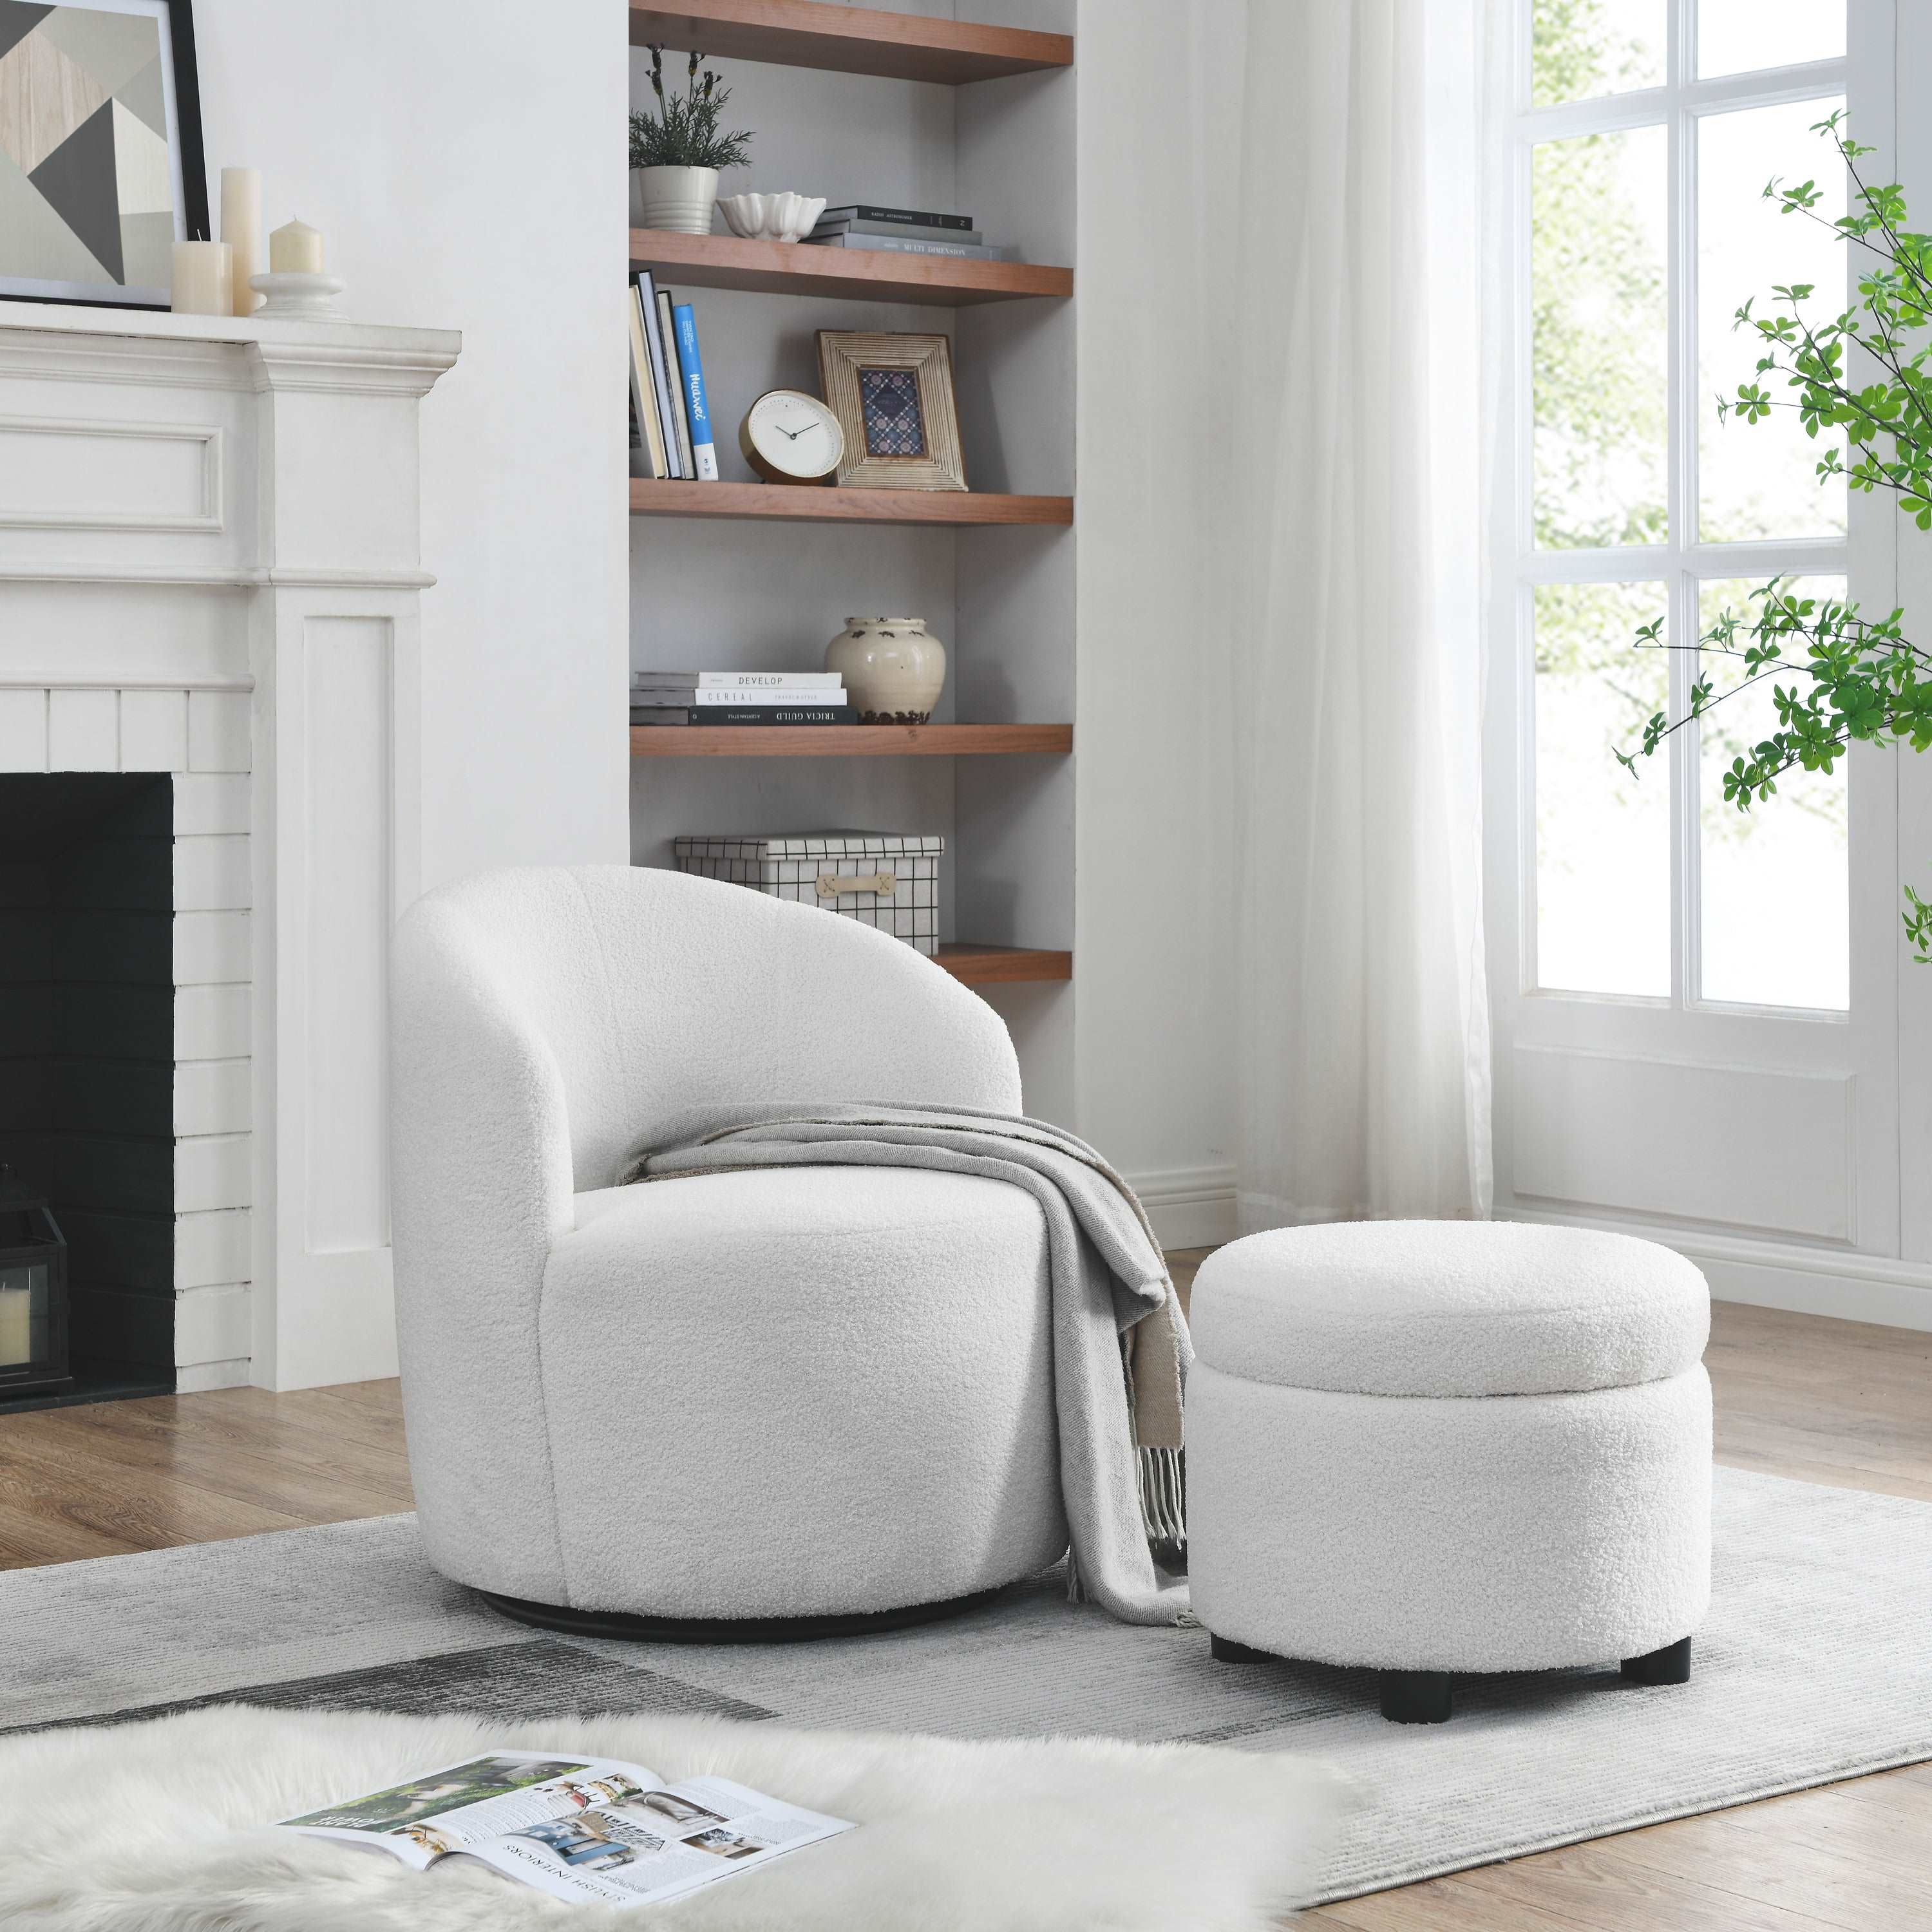 Bellemave Living Room 360 ° Swivel Chair with Round Storage